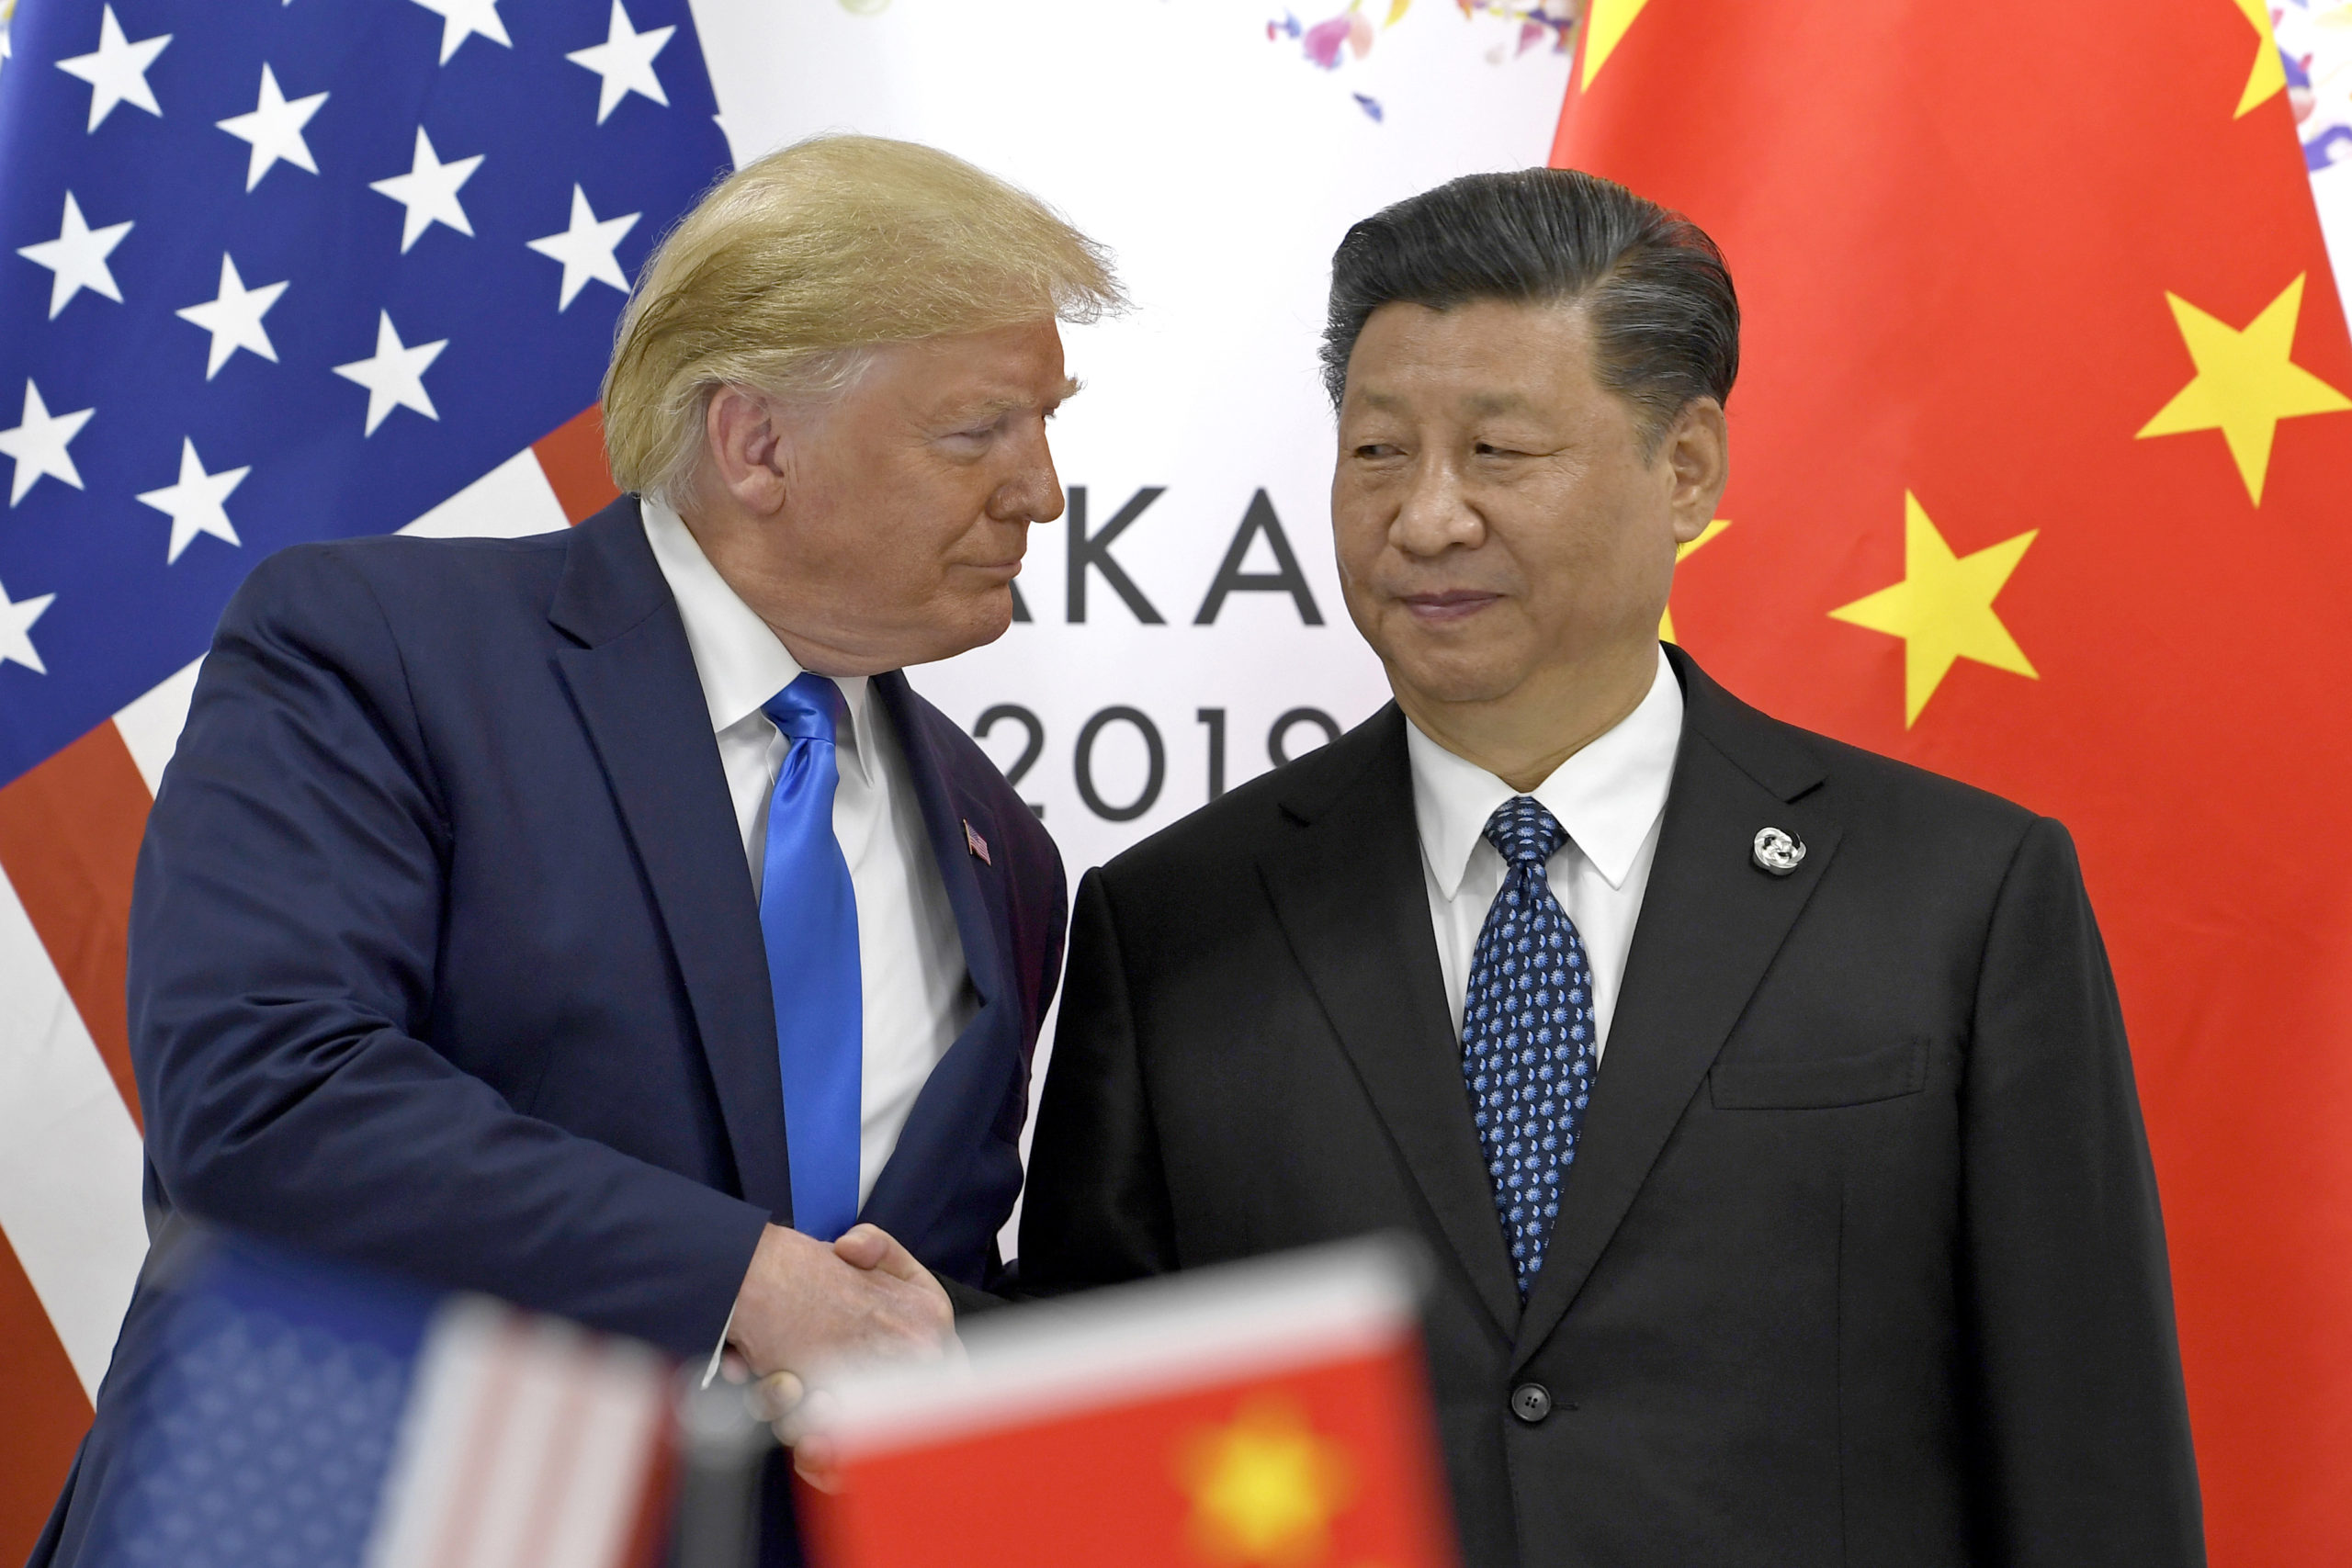 U.S. President Donald Trump greets Chinese President Xi Jinping at the G-20 summit in Osaka, Japan, last year.